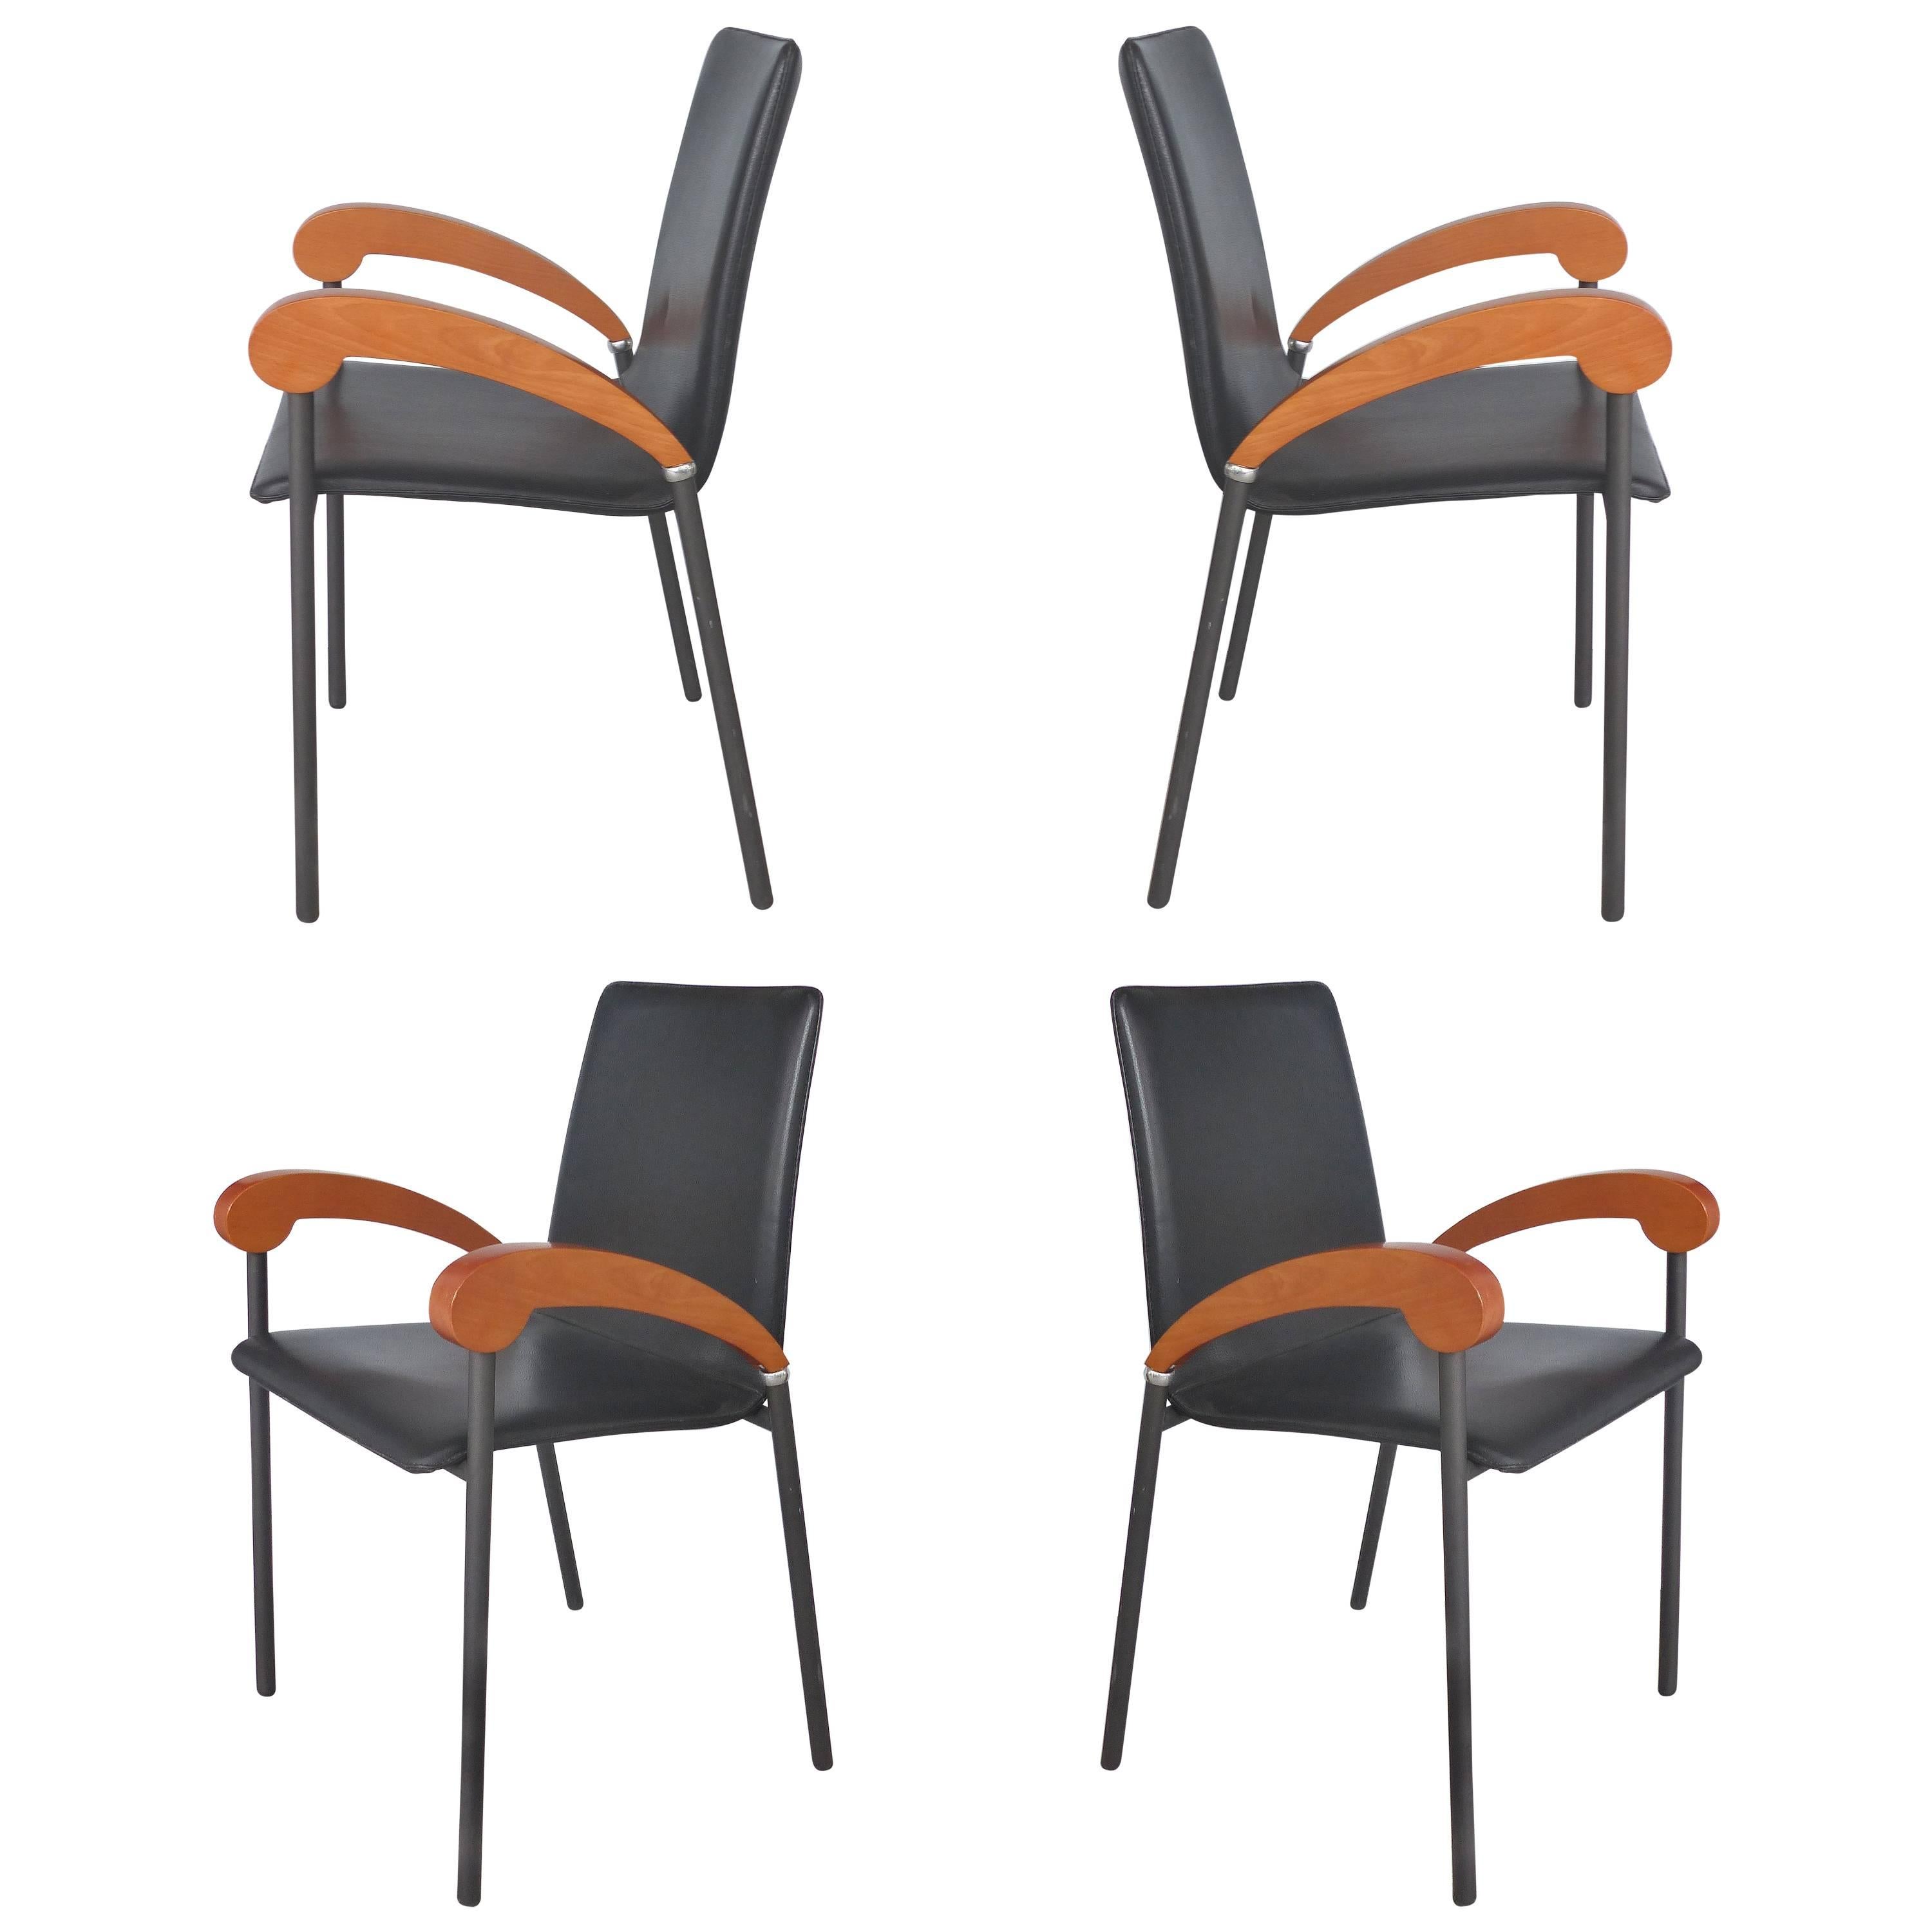 XO Design Metal and Wood Armchairs with Full Grain Leather Seats 